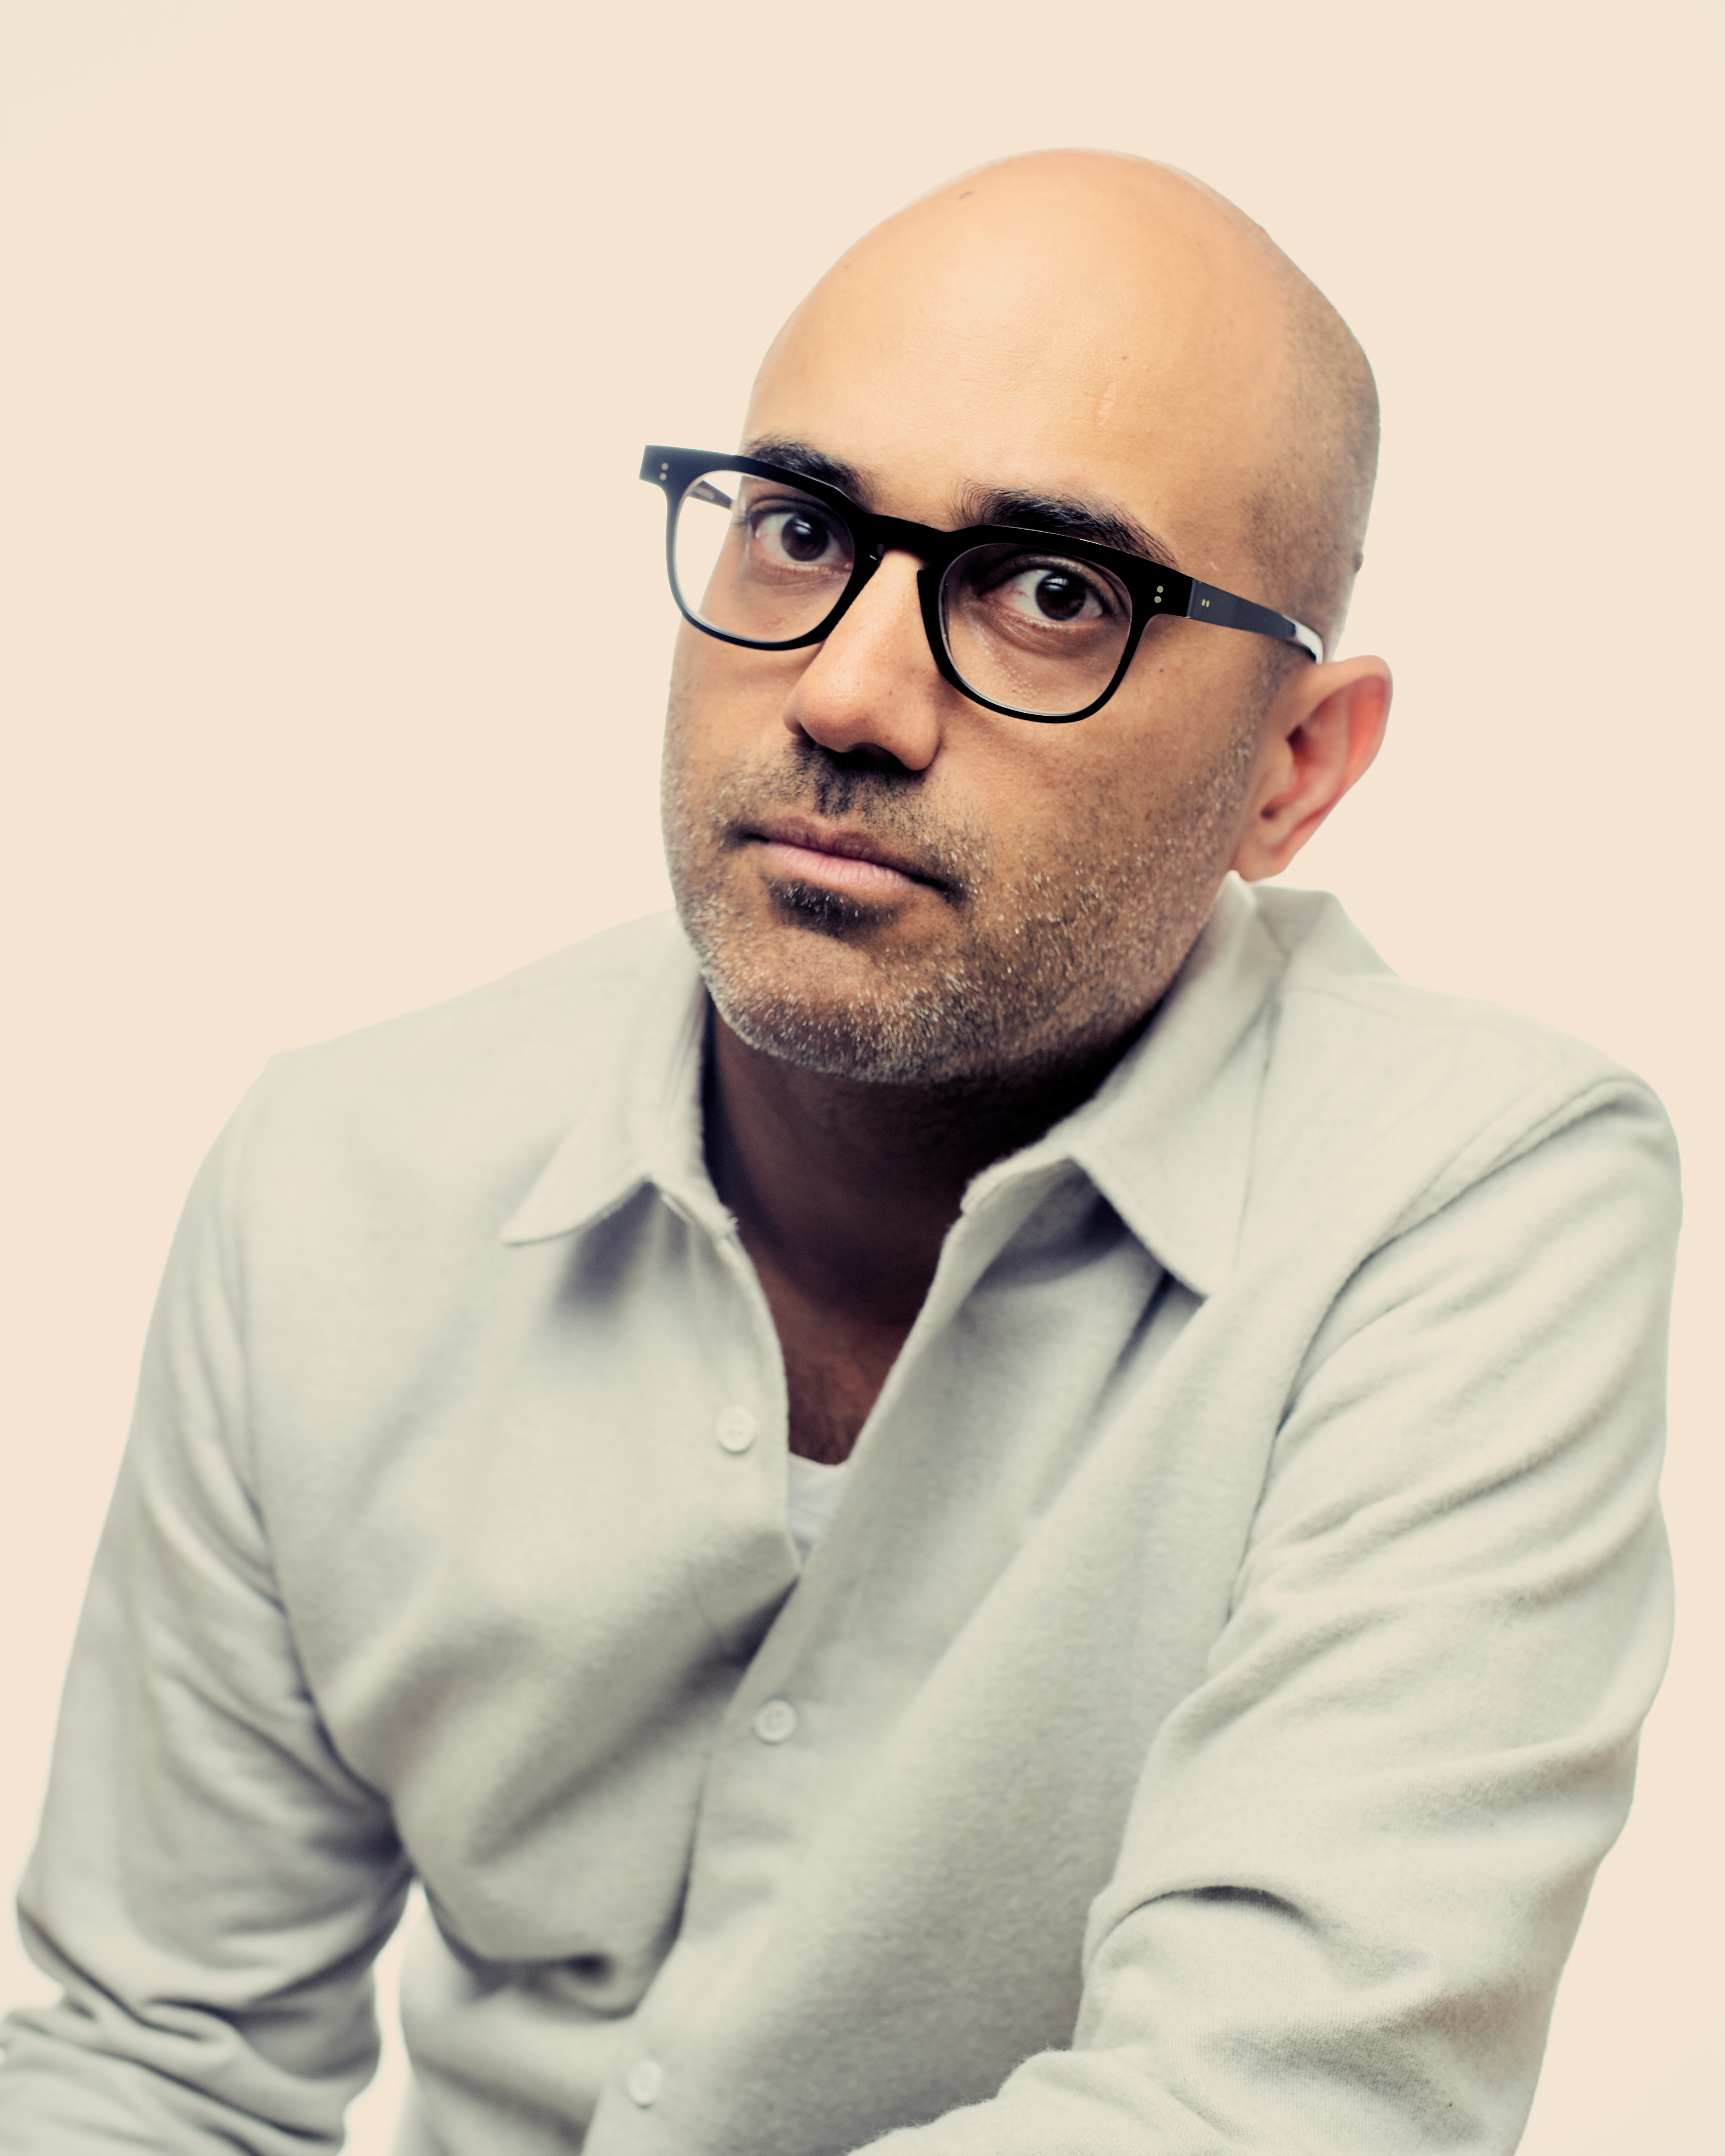 Head shot of Ayad Akhtar in a cream colored collared shirt,